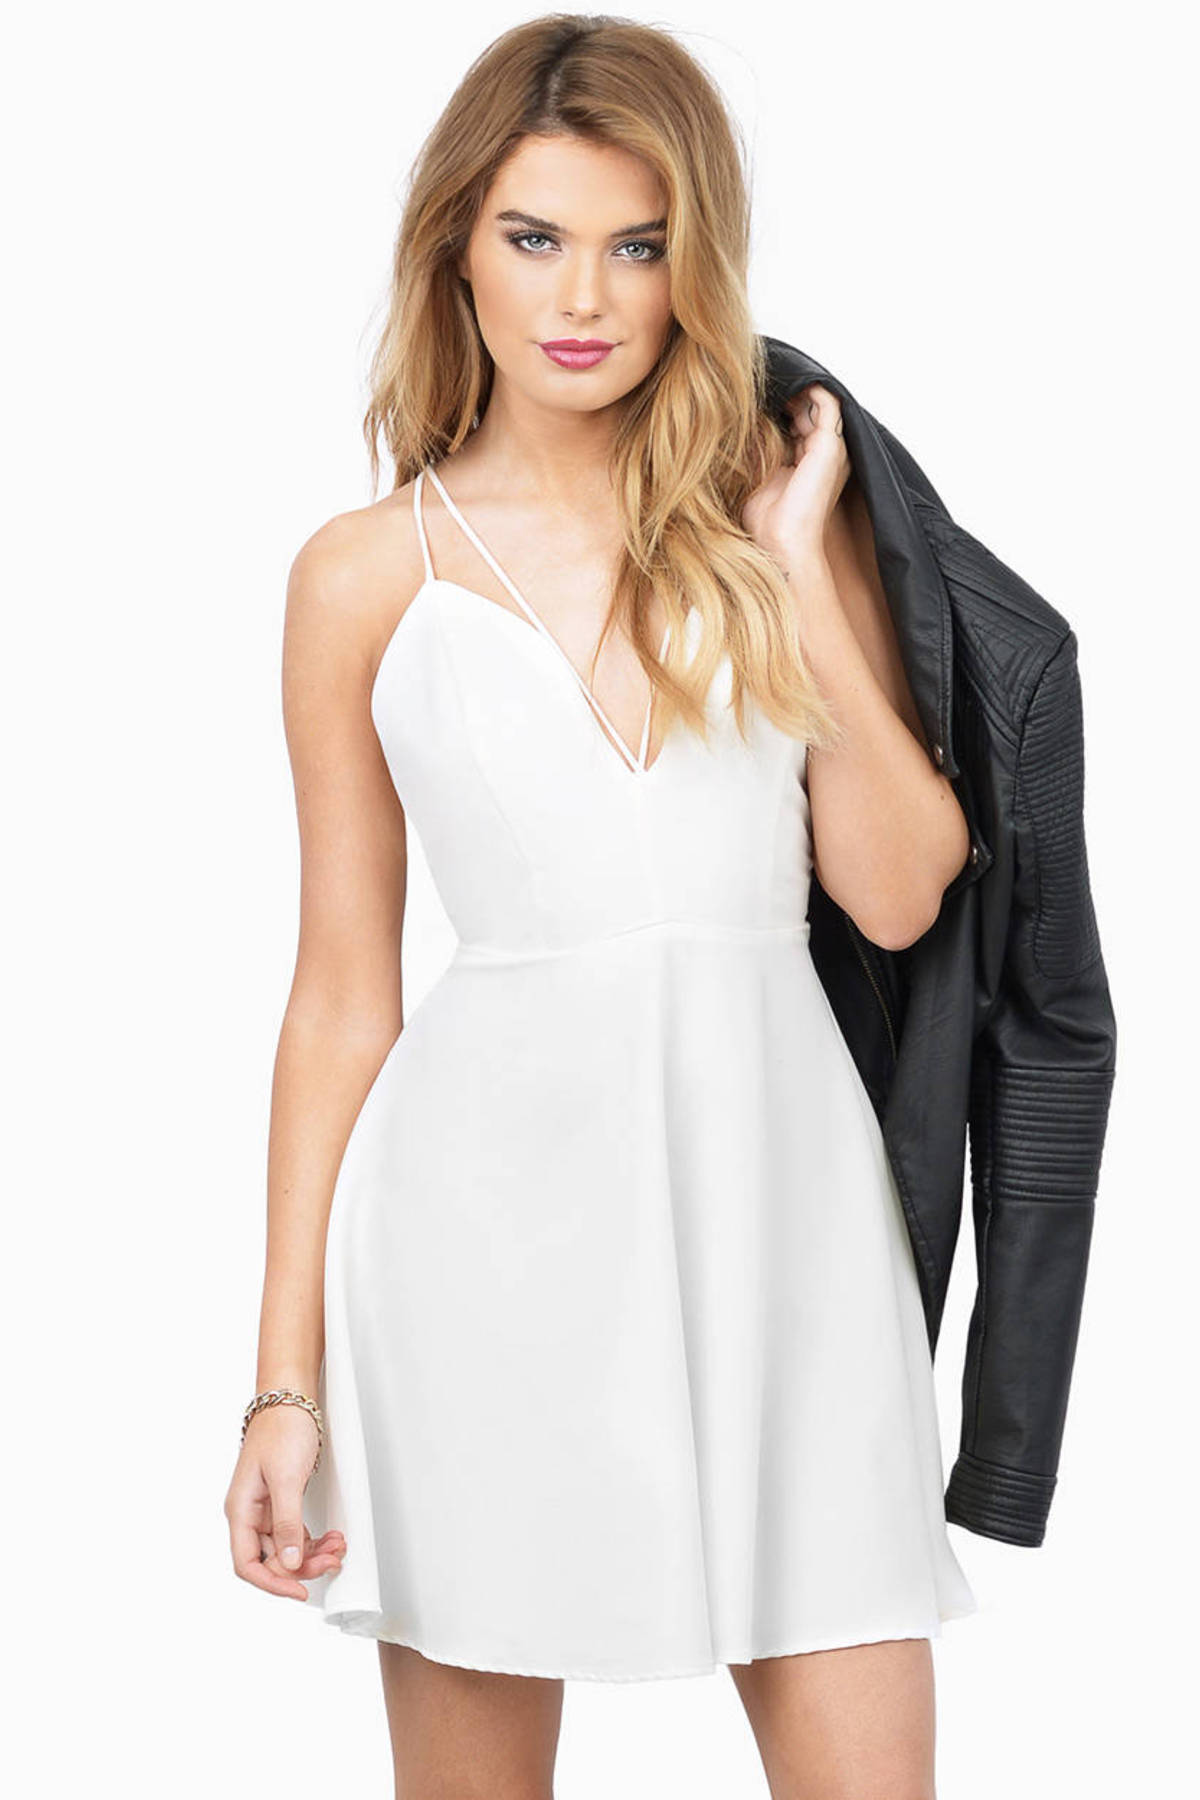 Rooftop Romance Flare Dress in Ivory - $50 | Tobi US